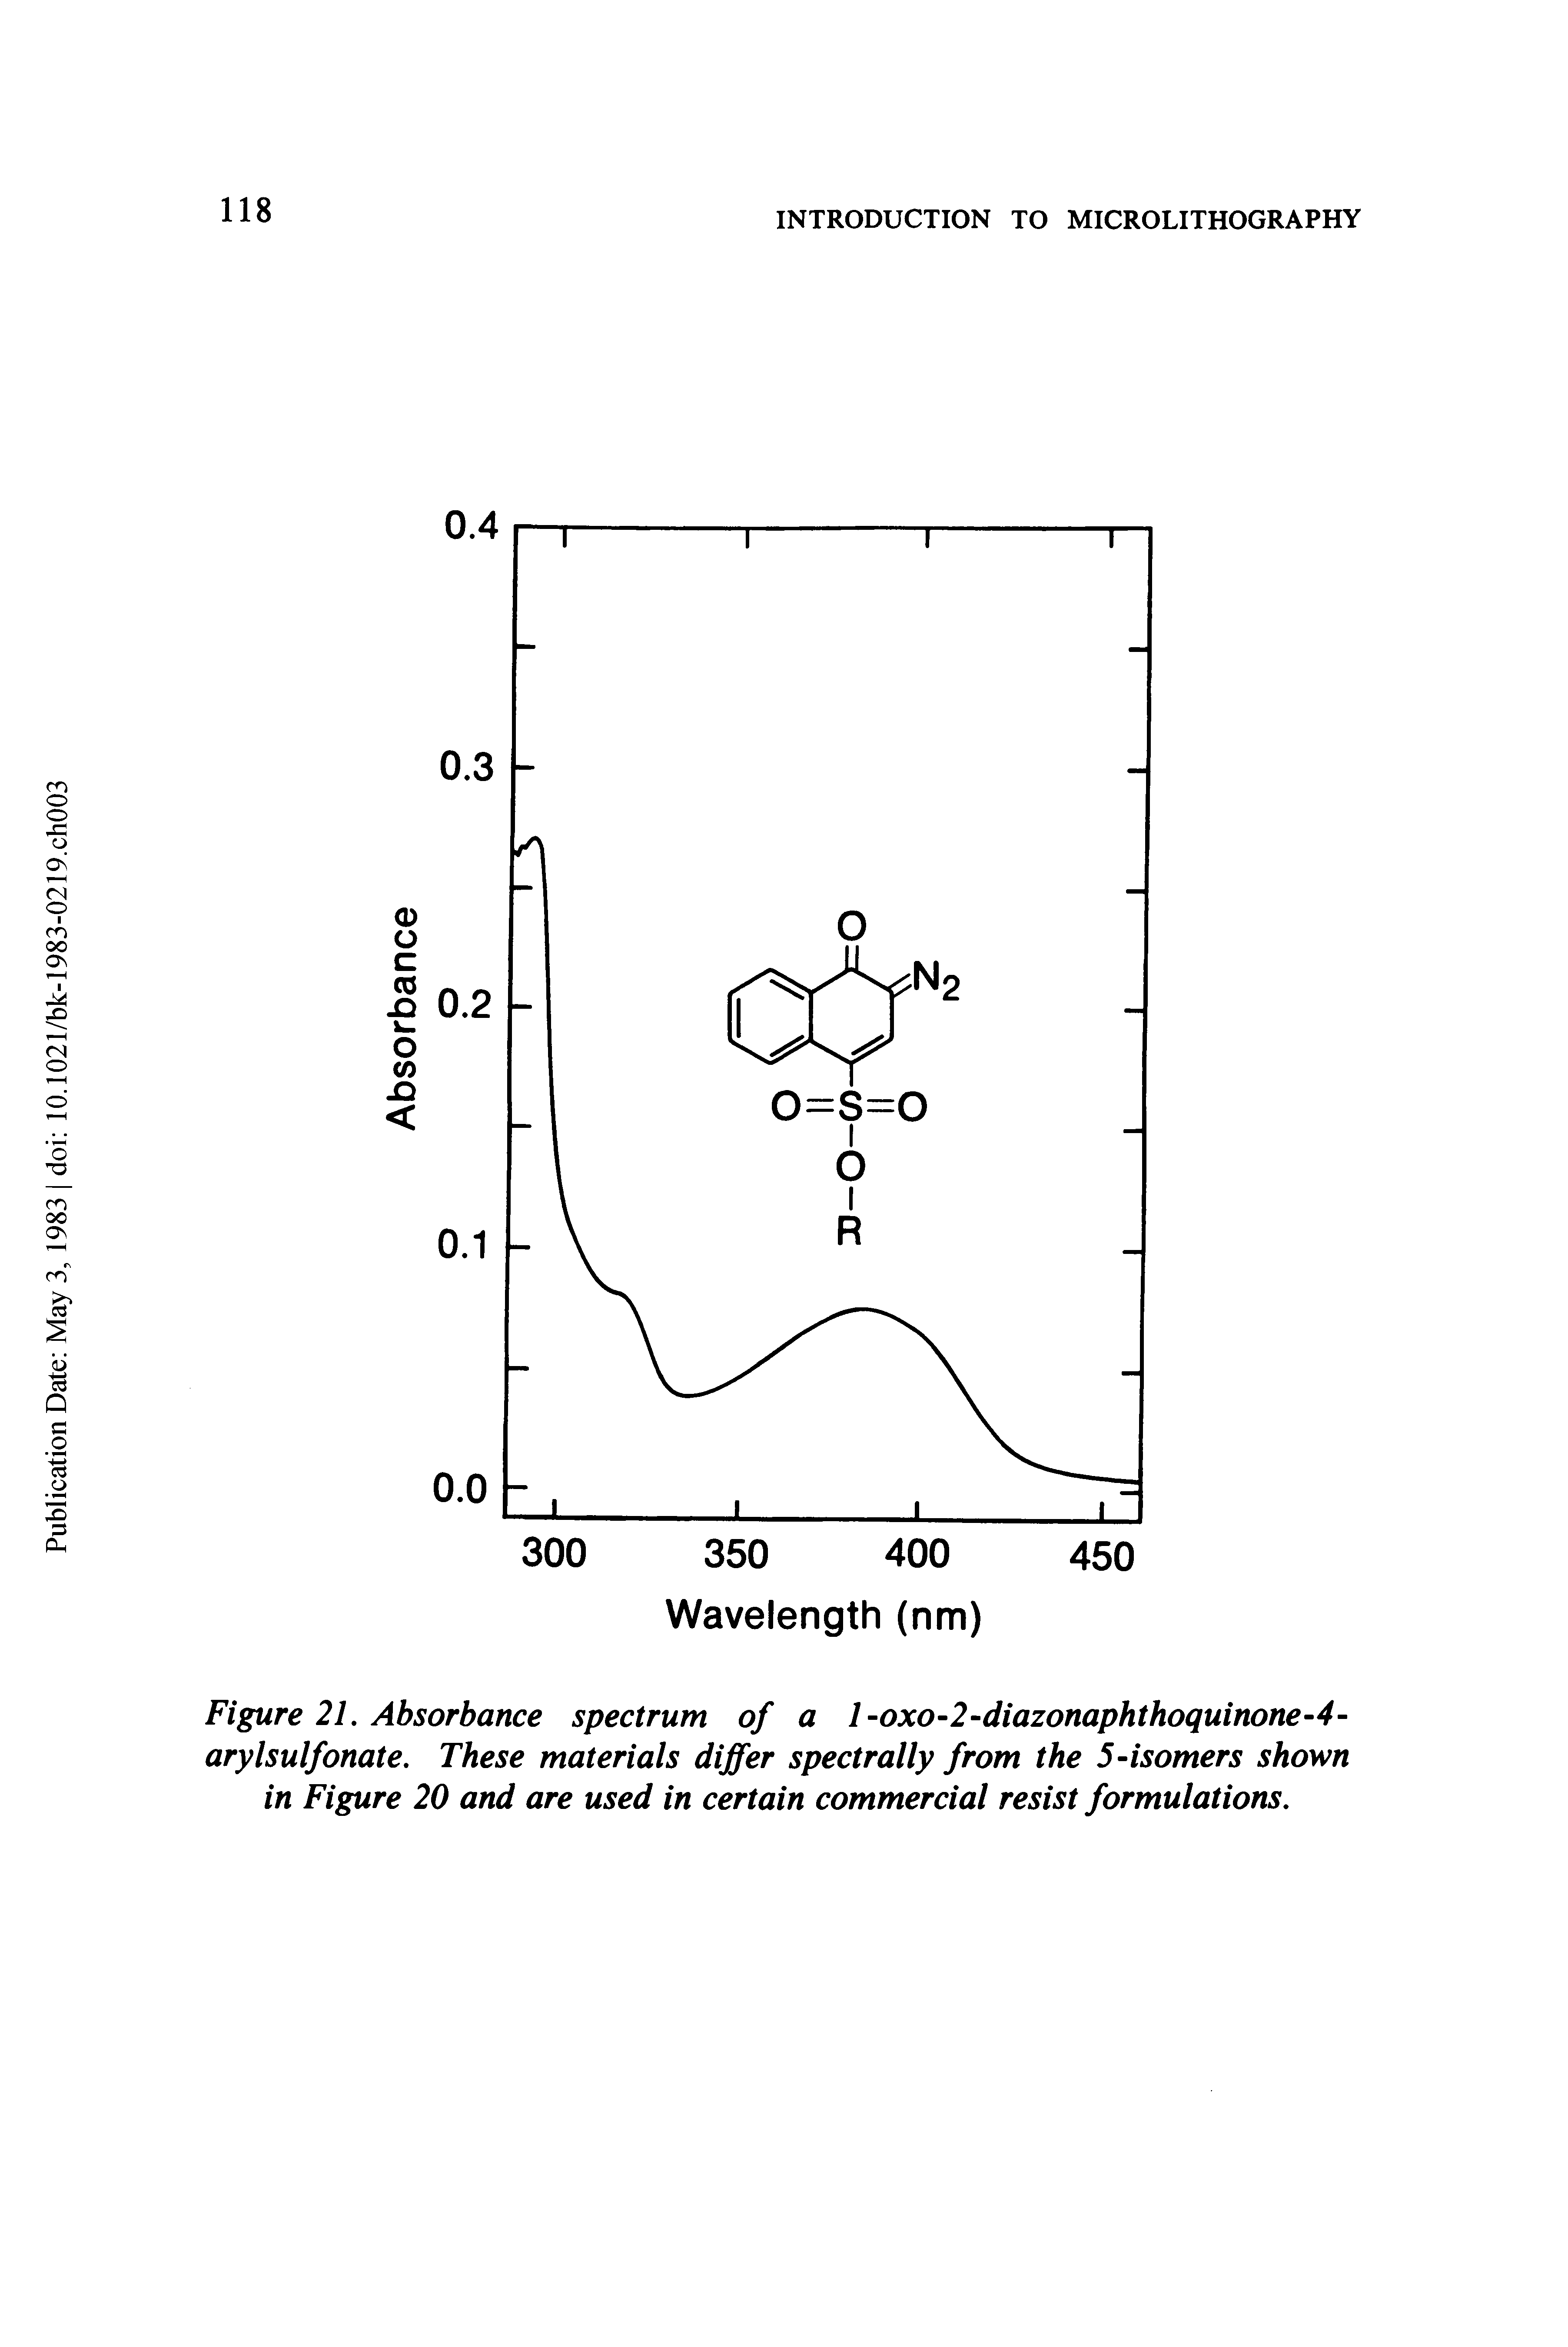 Figure 21. Absorbance spectrum of a l-oxo 2 diazonaphthoquinone-4-arylsulfonate. These materials differ spectrally from the 5 isomers shown in Figure 20 and are used in certain commercial resist formulations.